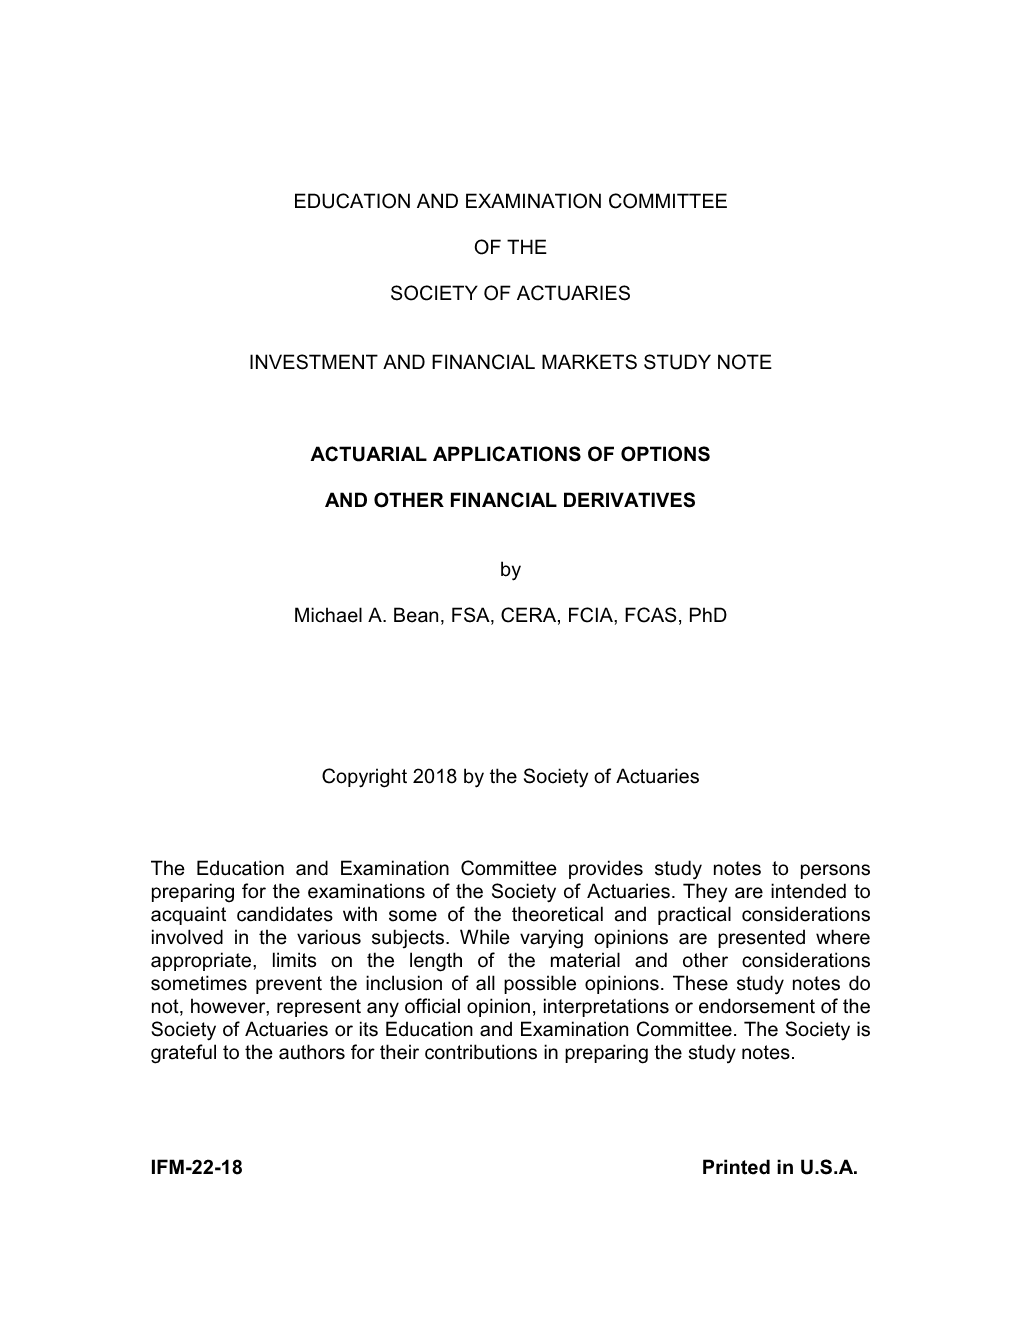 Investment and Financial Markets Study Note